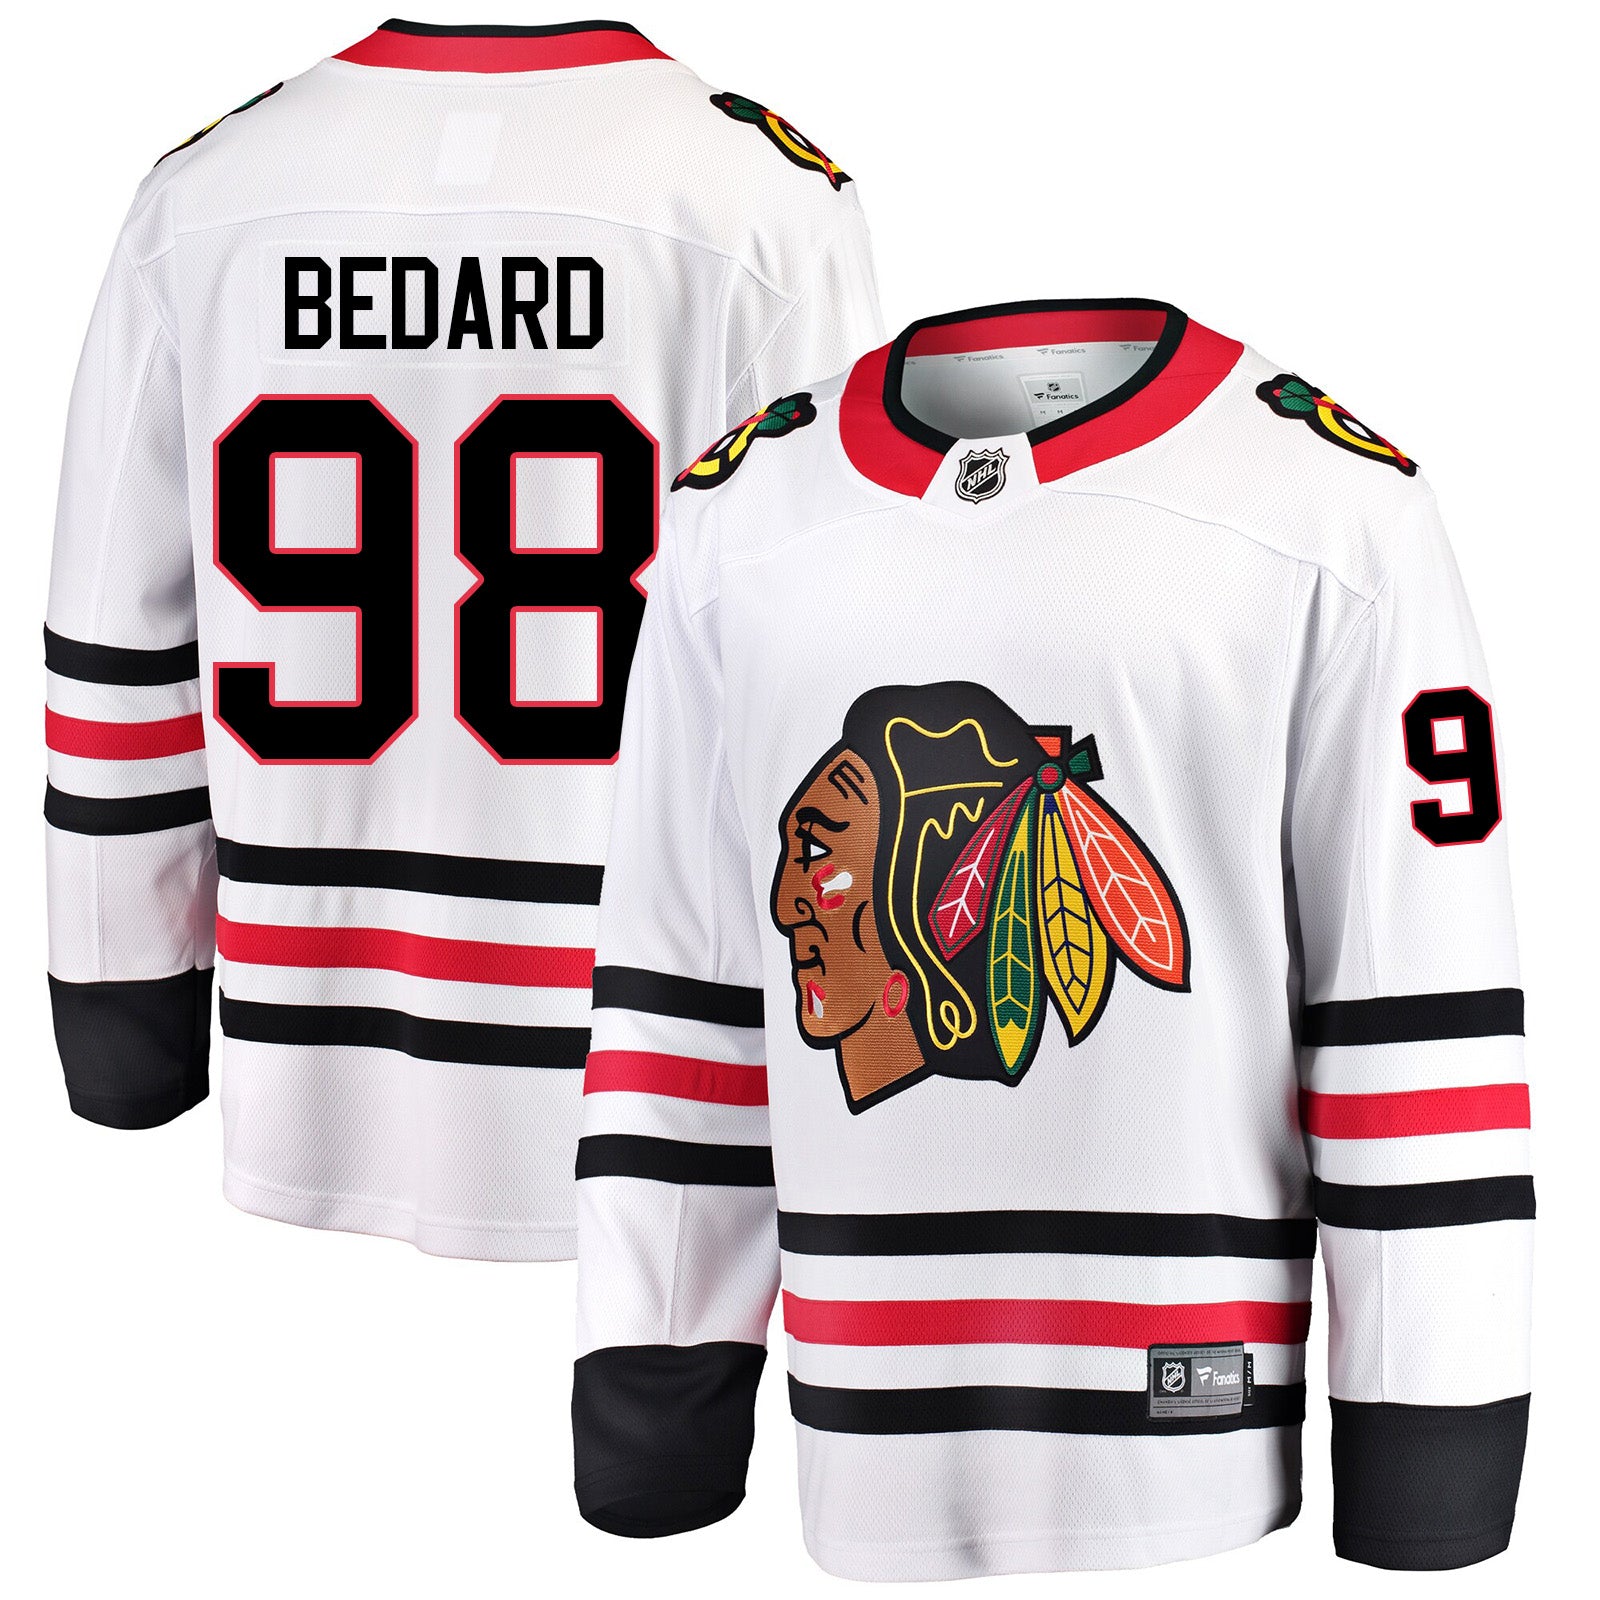 Original Six - NHL Hocky Sweater Jersey for Sale in Chicago, IL